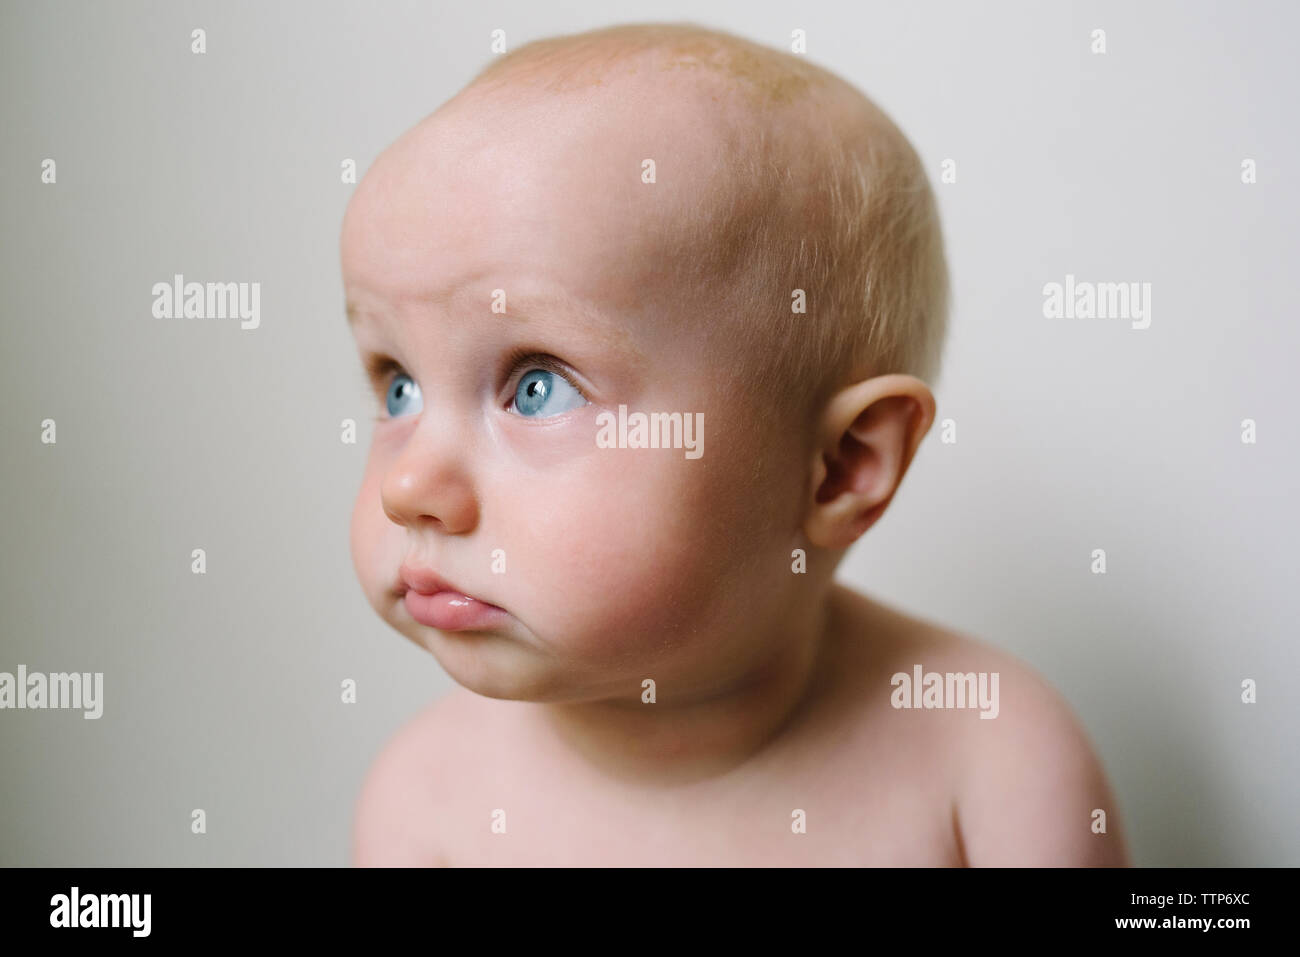 Cute baby girl looking away against wall Banque D'Images